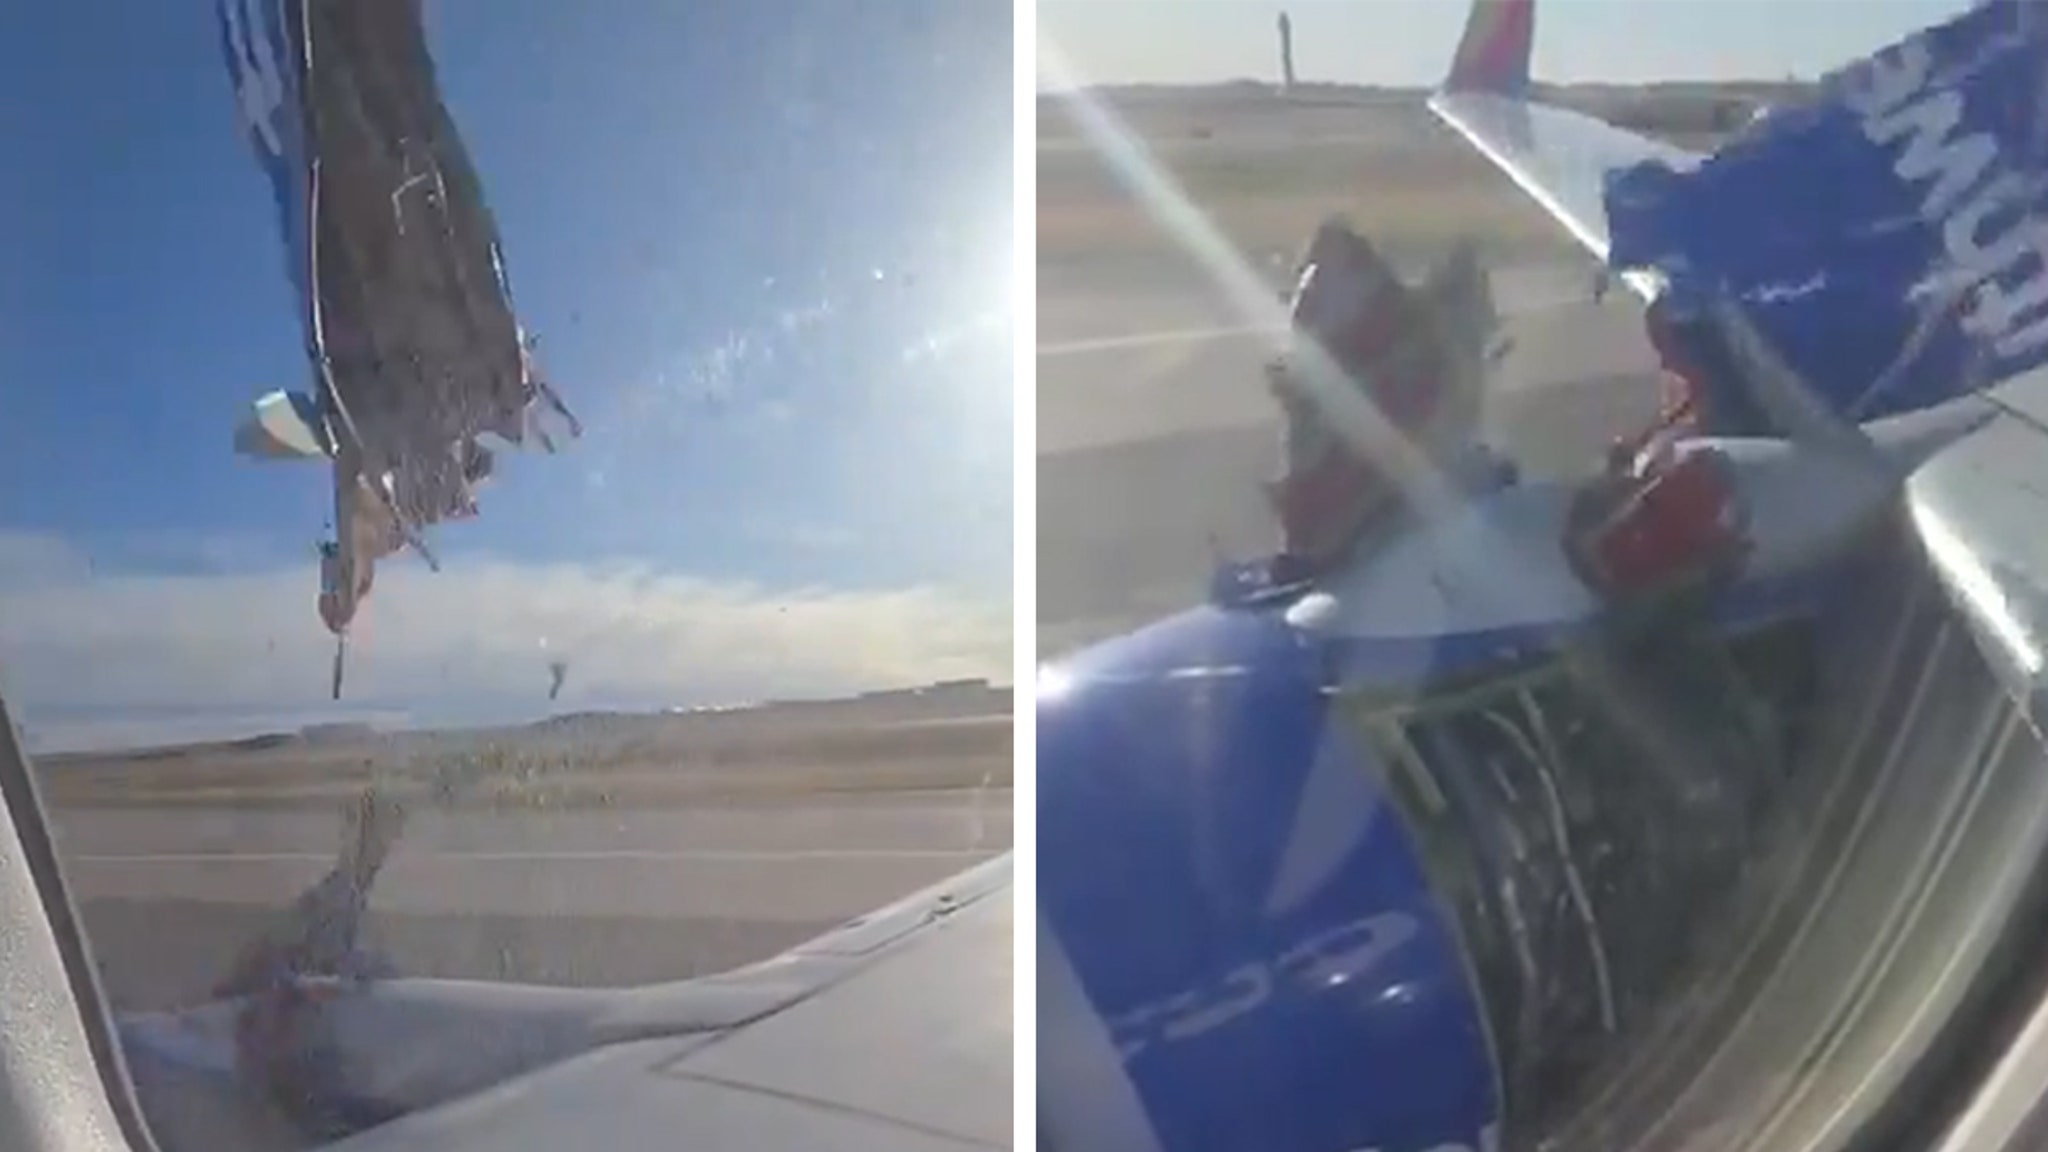 Boeing 737 Engine Cover Breaks Away in Mid-Air Captured on Video During Takeoff